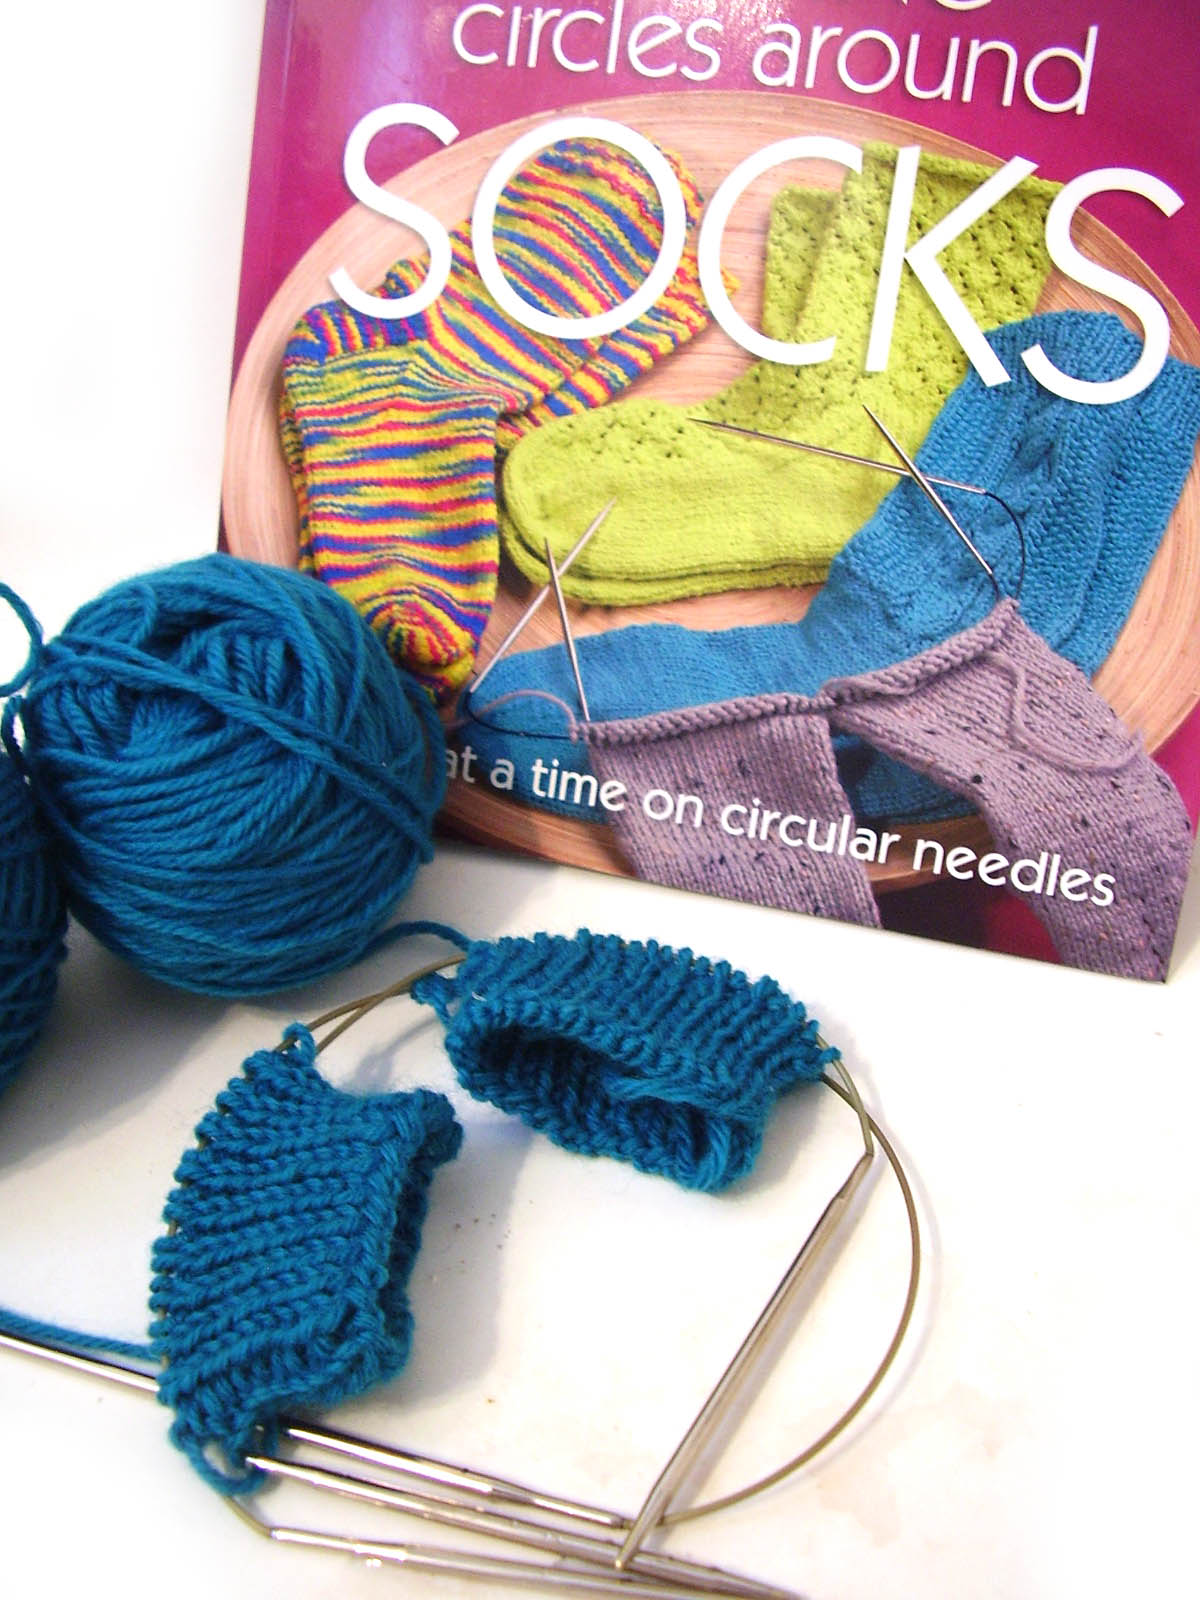 Knitting needles for socks - which should you pick for your first pair?